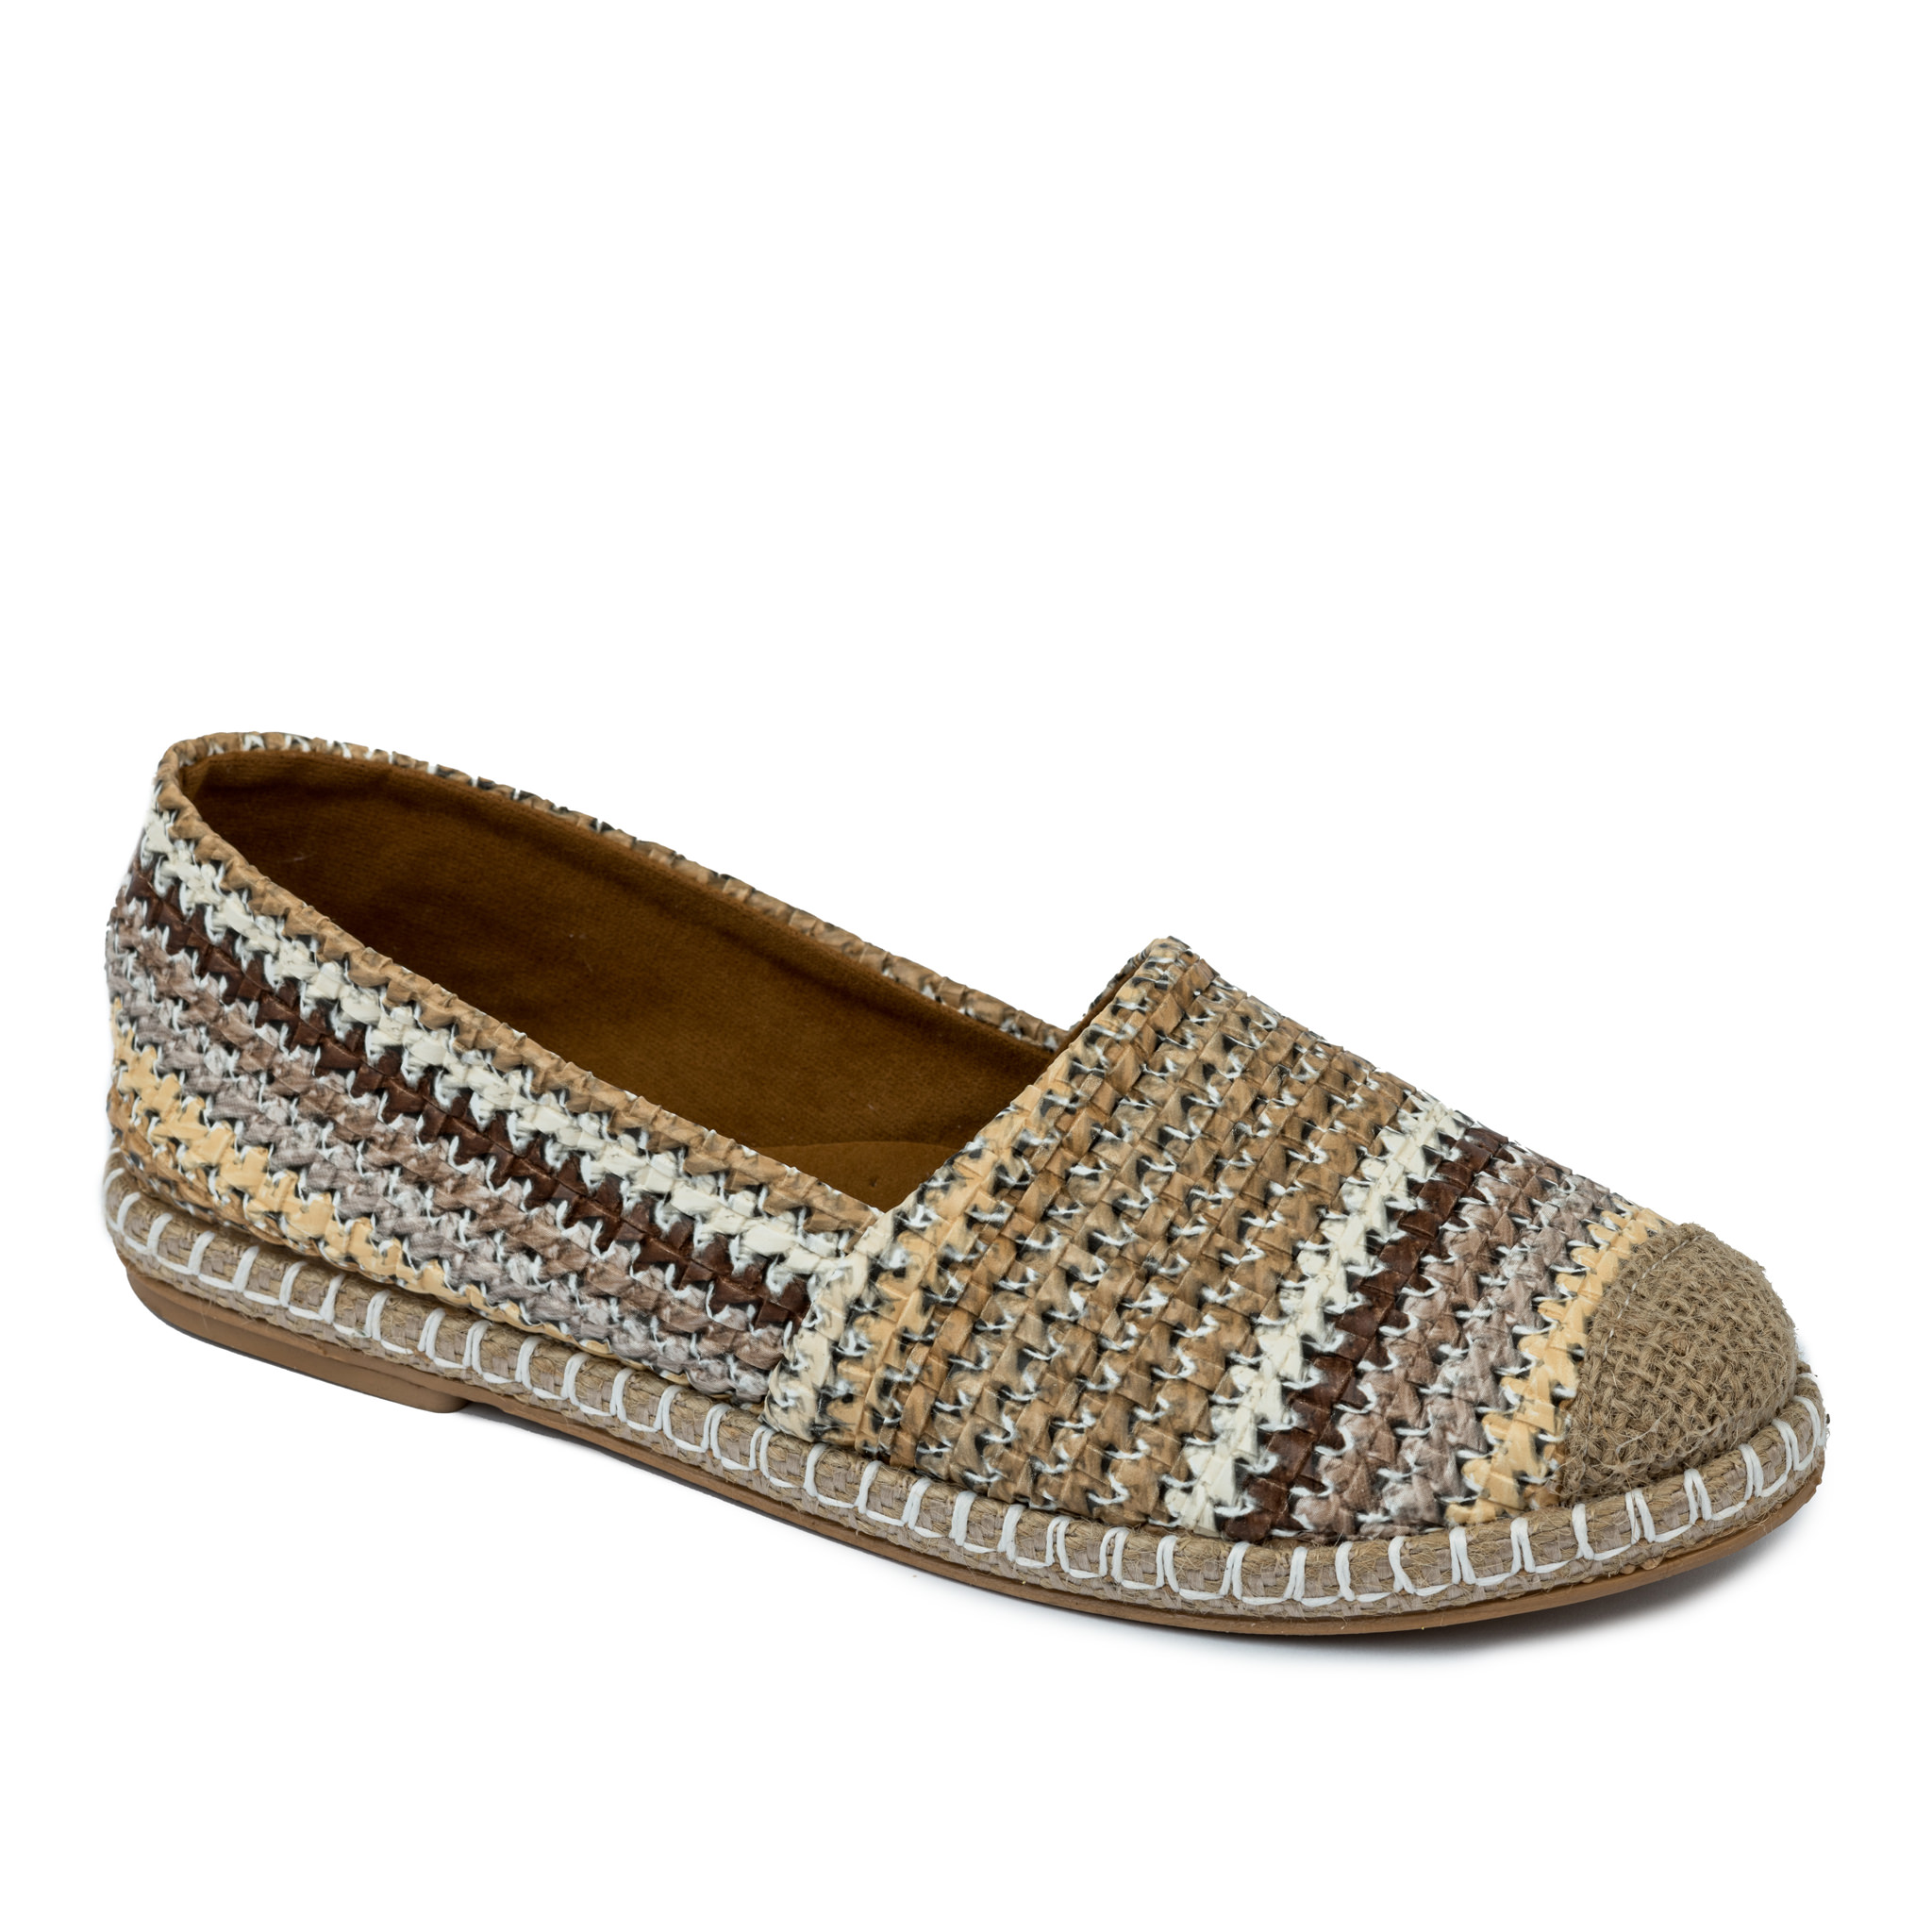 Women espadrilles and slip-ons A450 - BEIGE